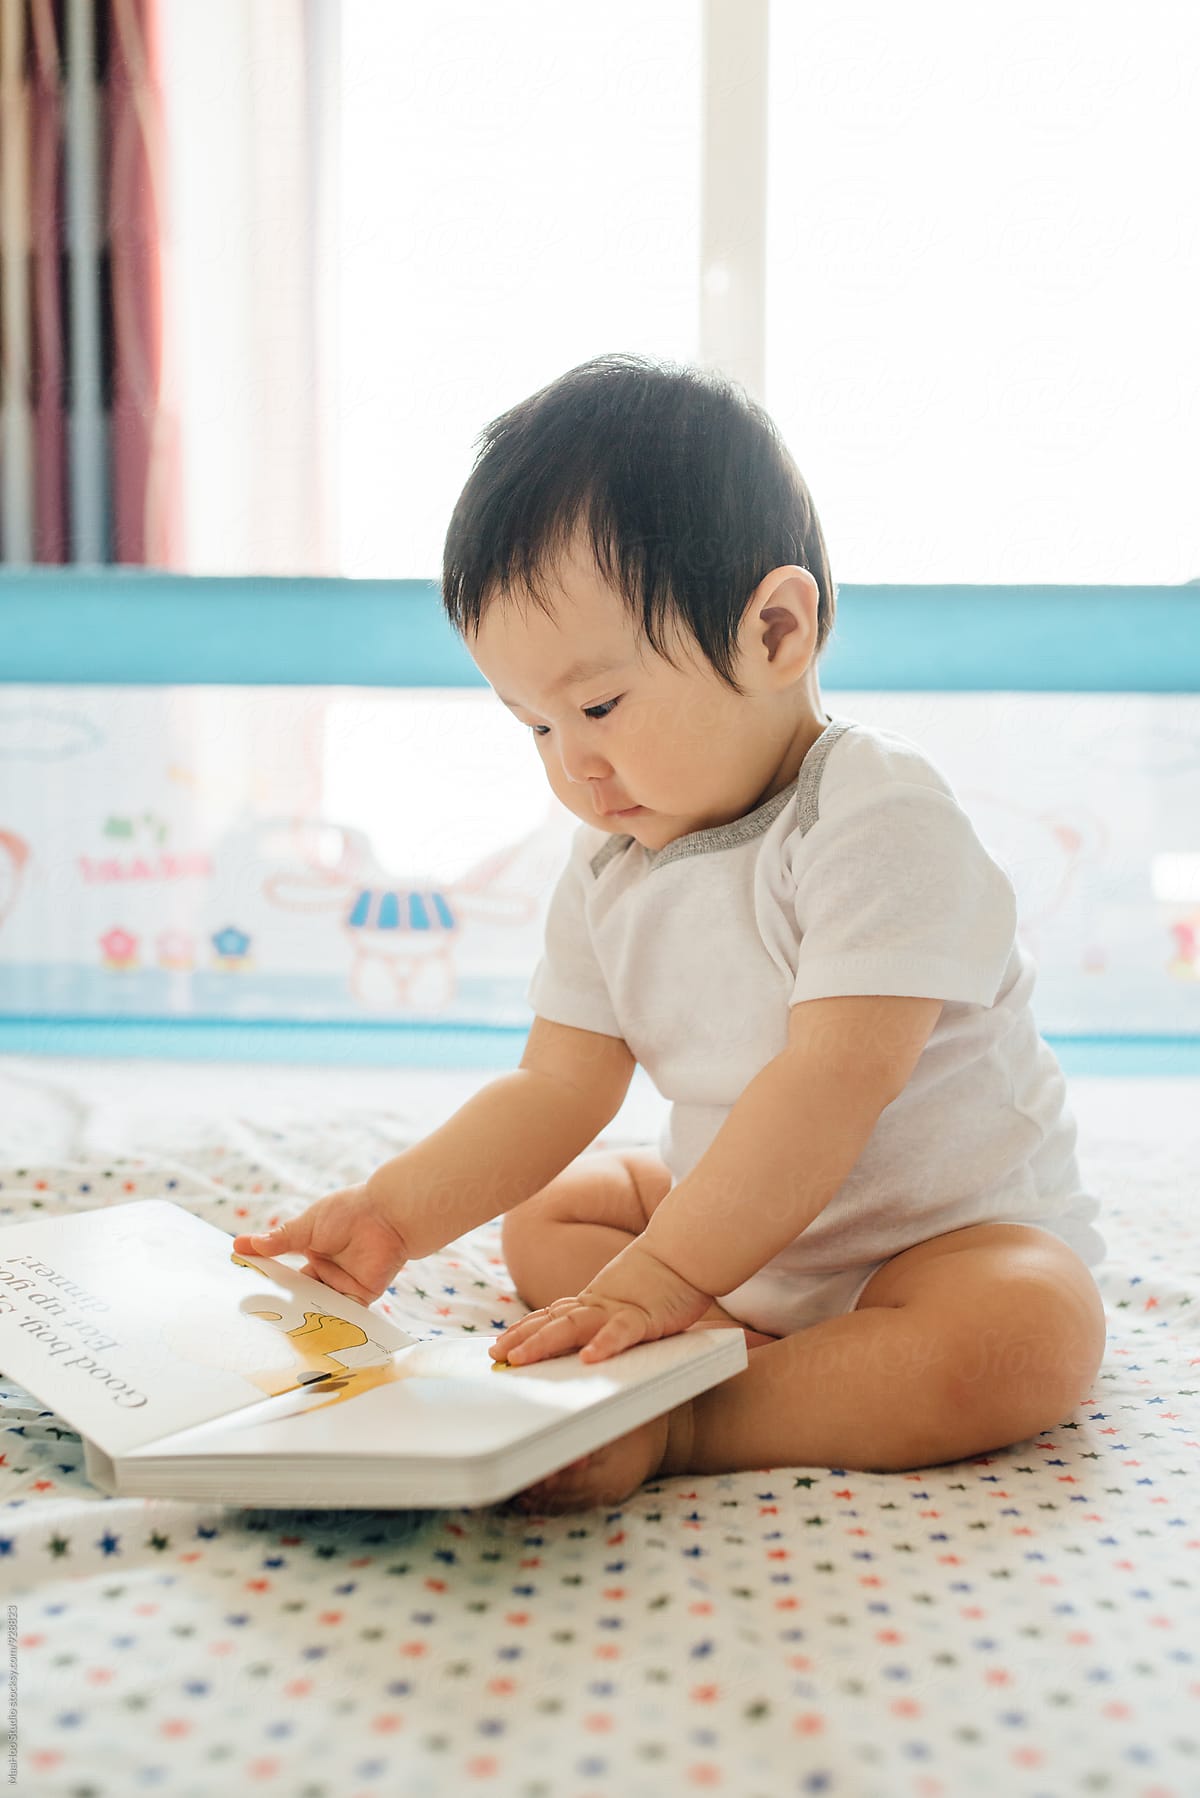 A Chinese baby boy reading books